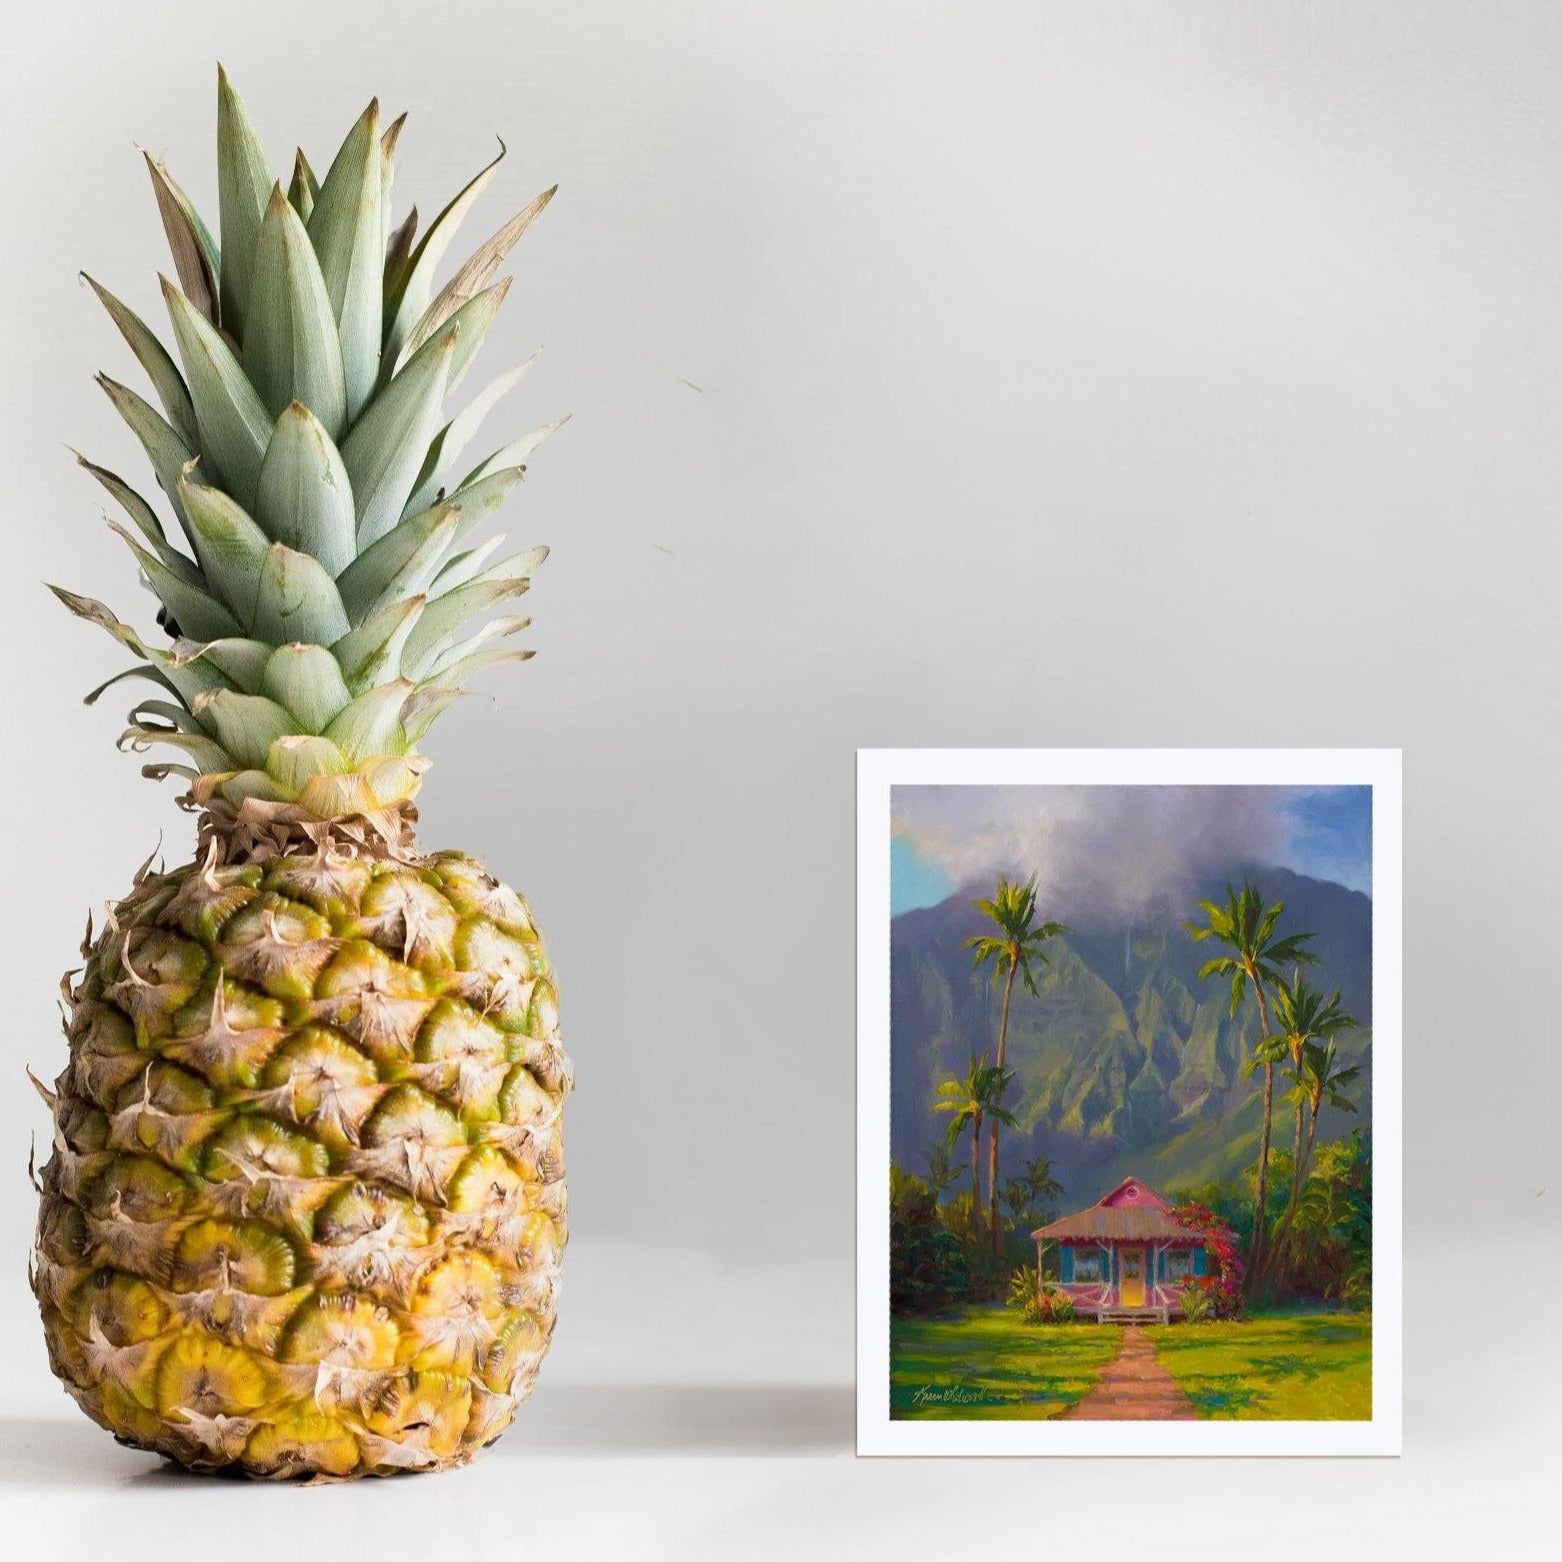 Kauai landscape art print of Hanalei cottage and palm trees in Hawaii